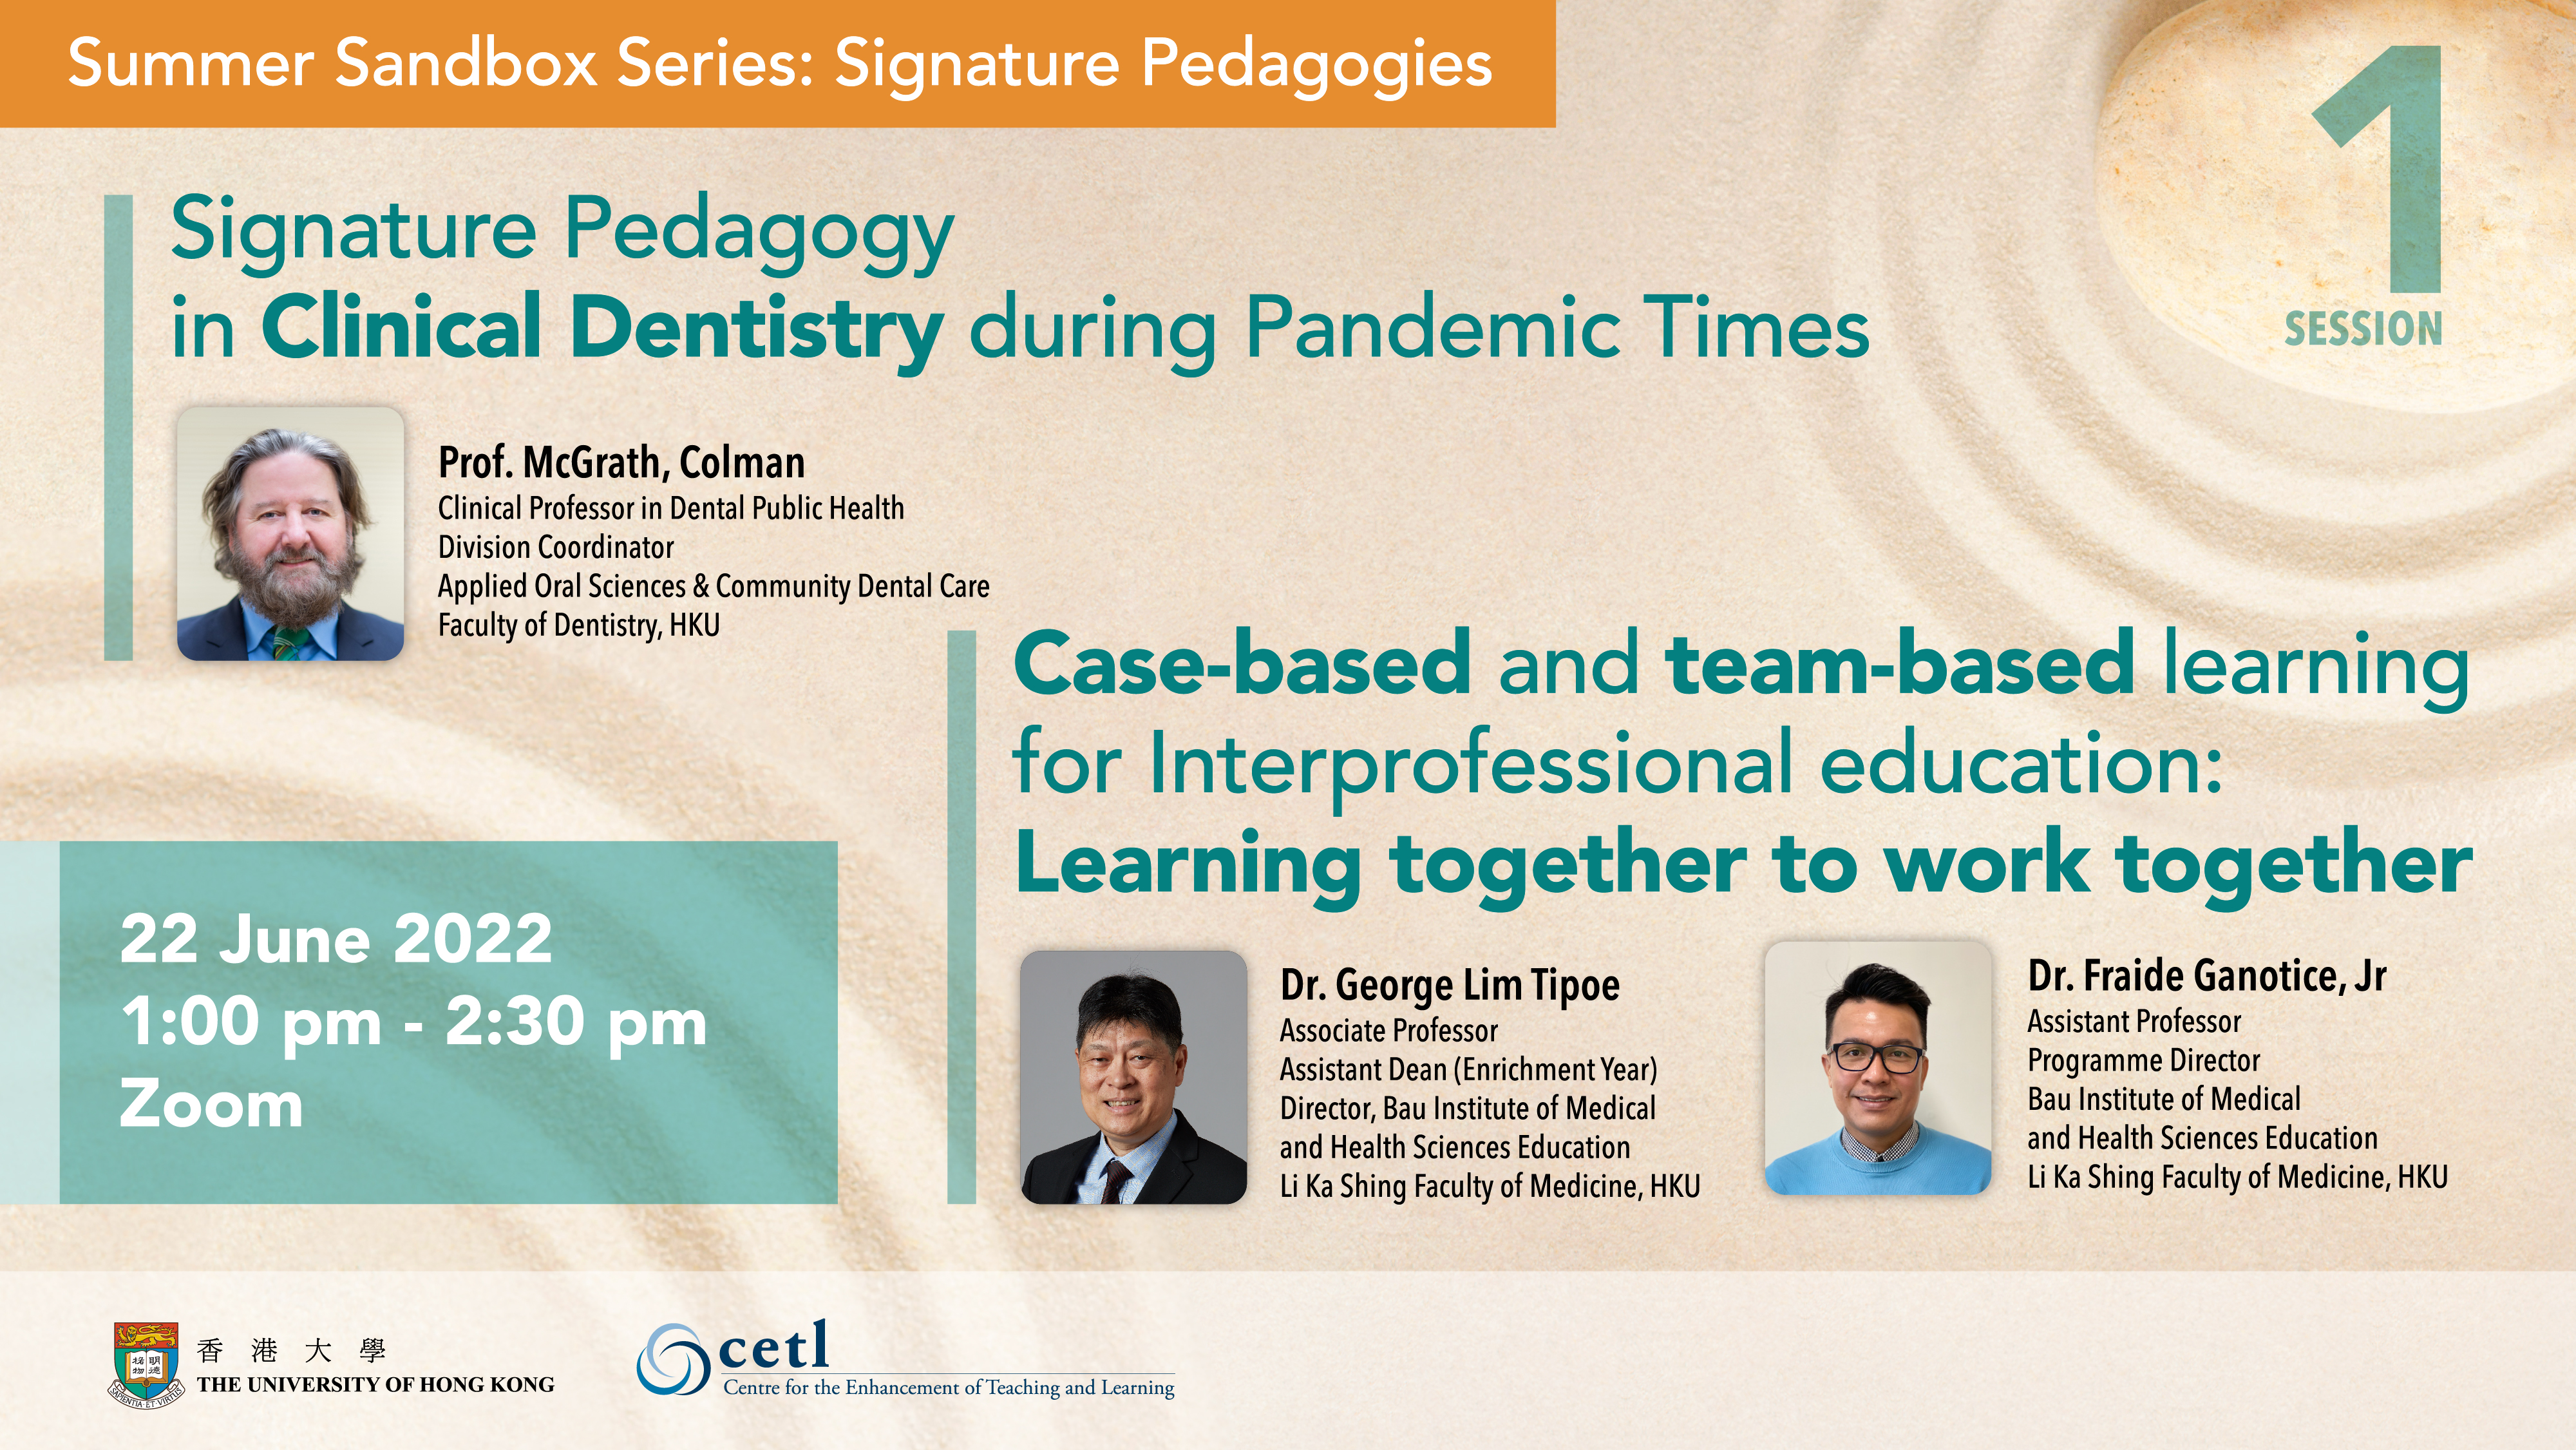 Session 1: Signature Pedagogy in Clinical Dentistry during Pandemic Times & Case-based and team-based learning for Interprofessional education: Learning together to work together